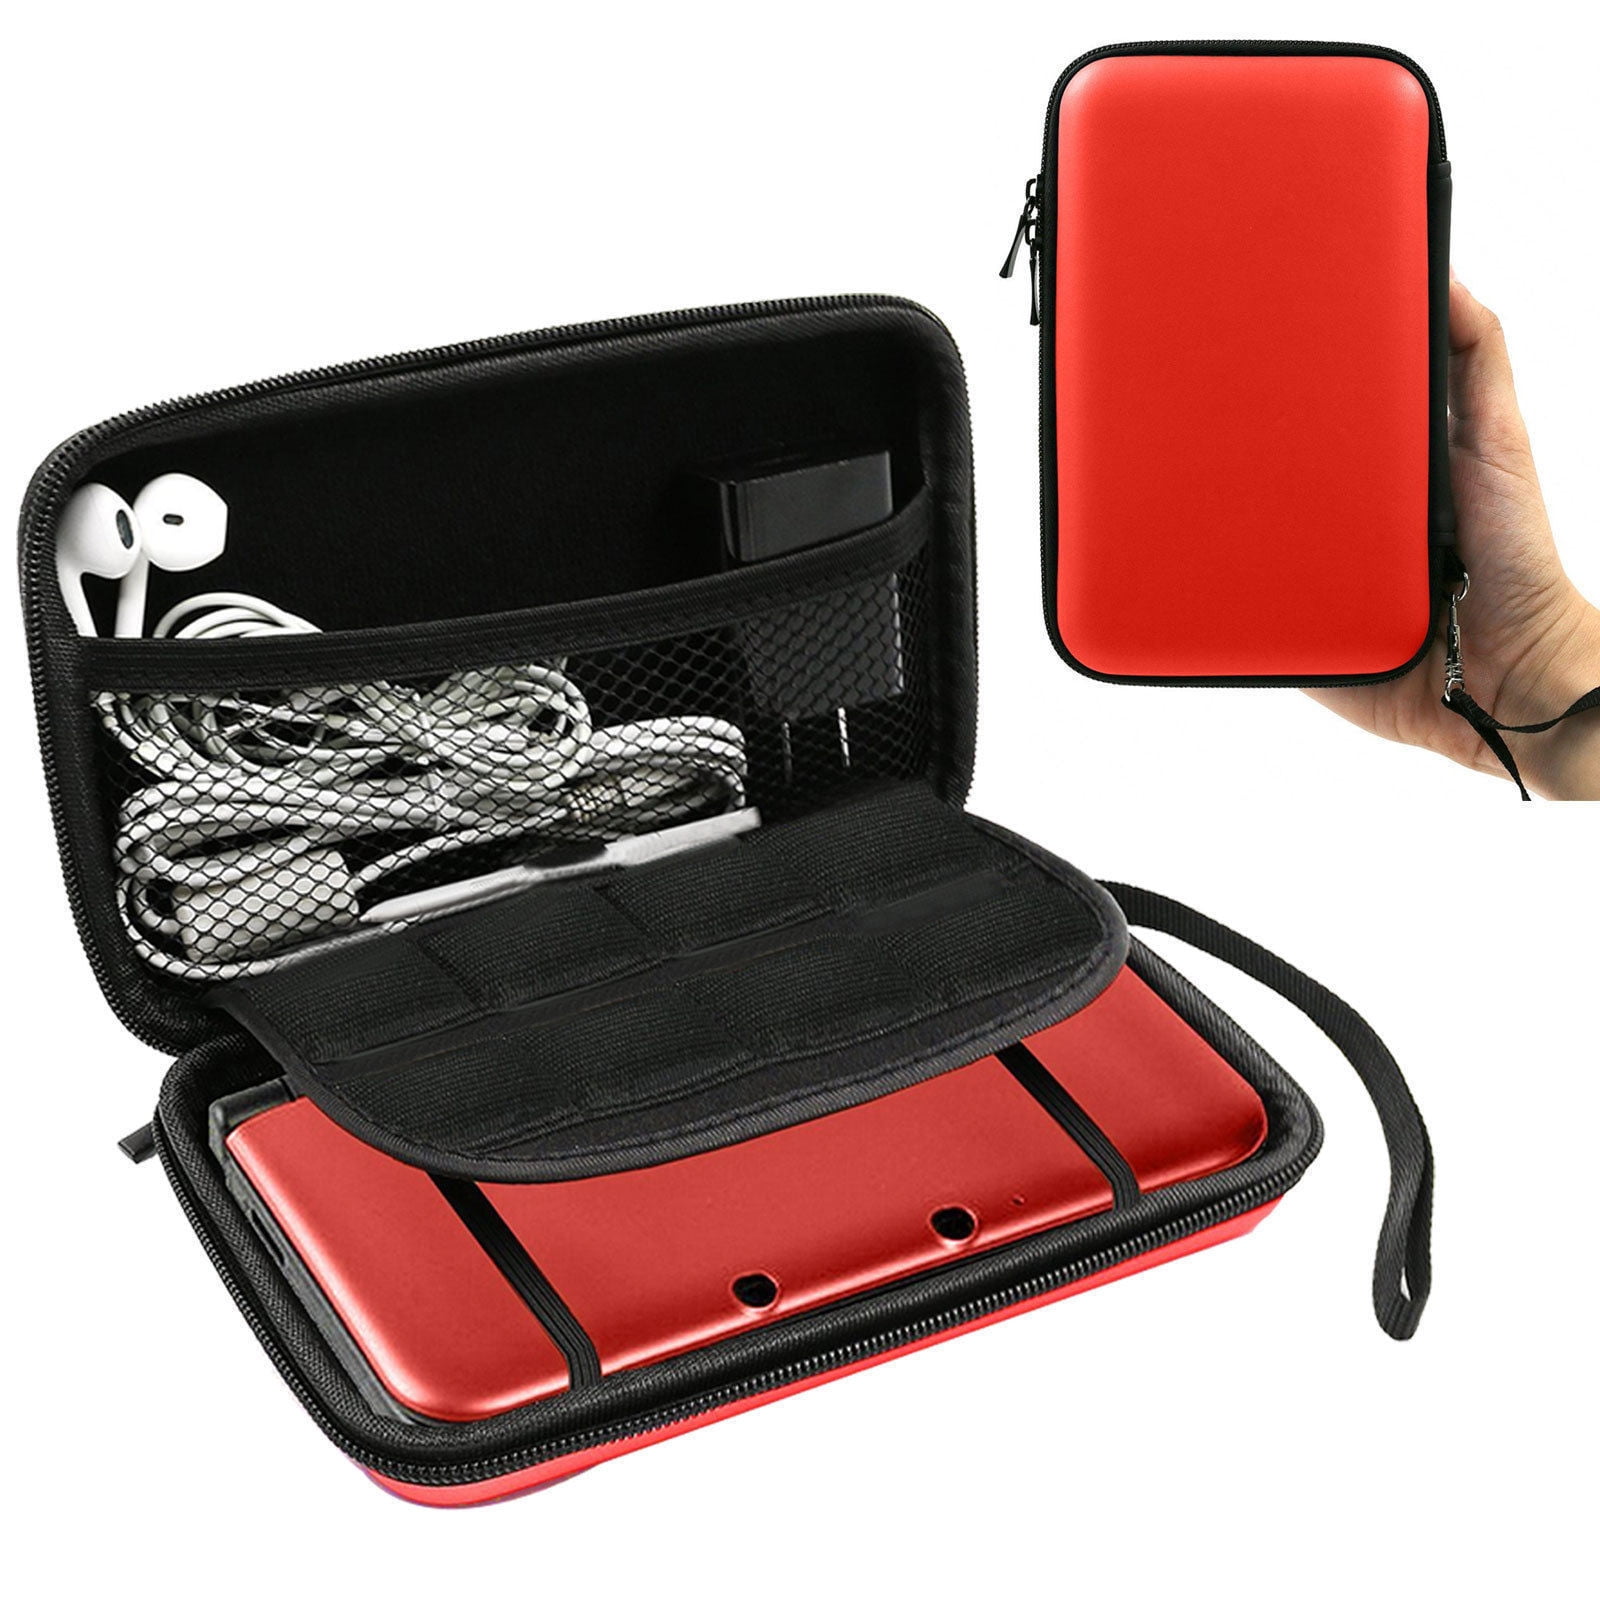 3ds xl carrying case